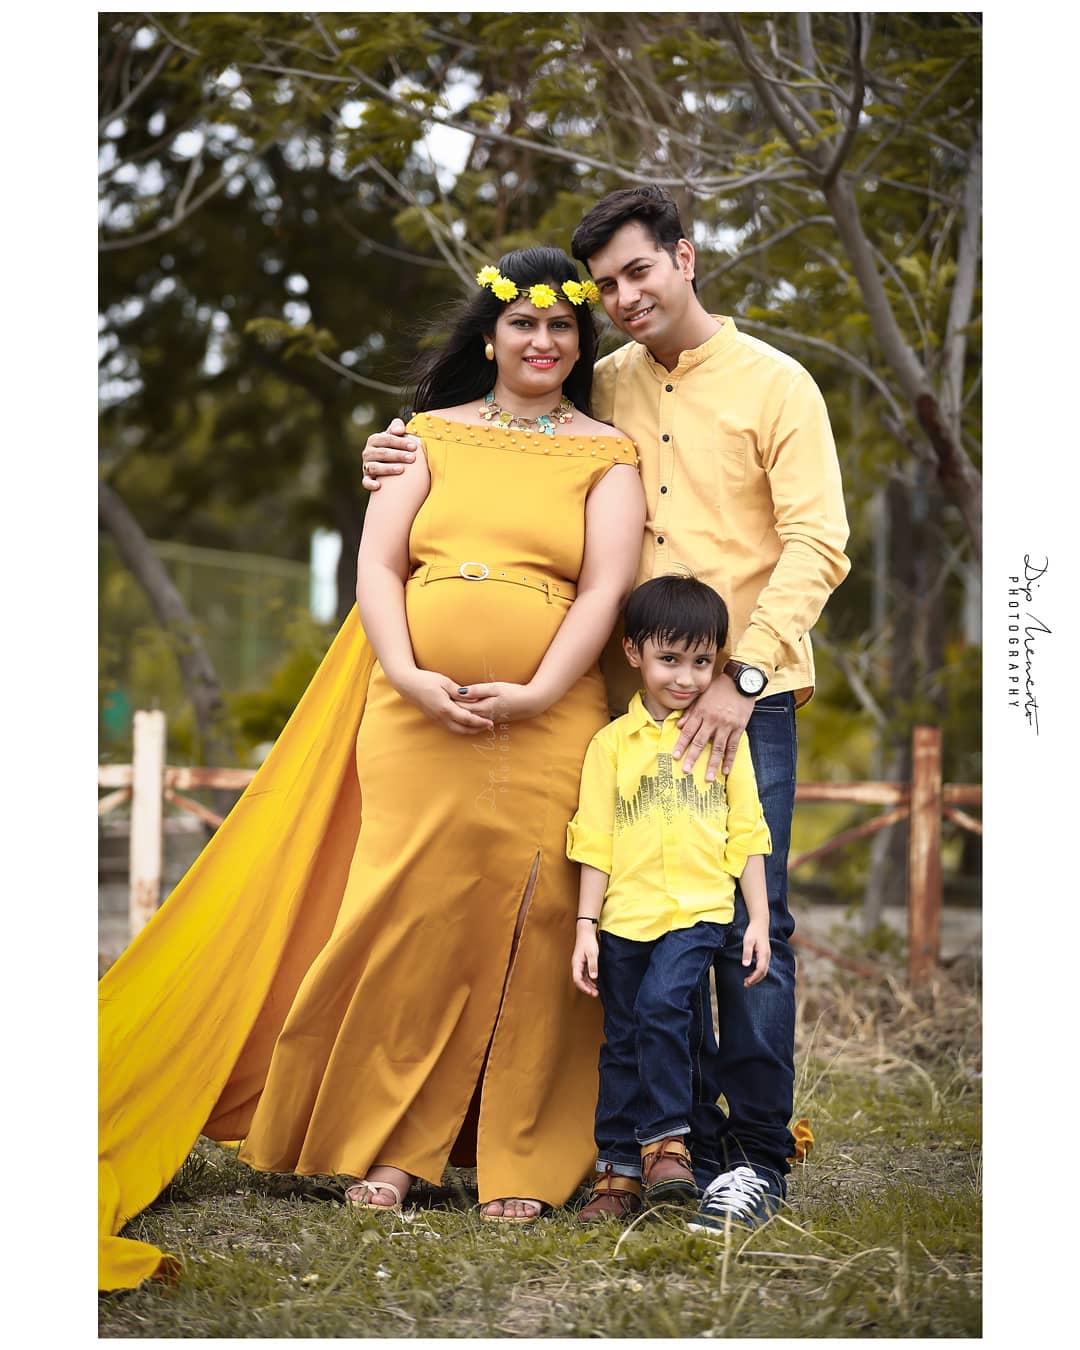 💞We're waiting for the biggest Gift from GOD👶.
.
.
 Shoot by : @dip_memento_photography
.
.
MOM to be..
Maternity Shoot.
.
.
Shoot With Canon 5d Mark iv + #Godox Hss
@canonindia_official
.
#maternityphotographer #maternityphotography #maternity #mommytobe #momtobe #newmommy #pregnant #pregnancy #expectingmother #9924227745 #maternityportraits #maternitypictures #motherhood #maternityshoot #babybump #daddytobe #dadtobe #babyiscomingsoon #thebump #maternityshoot #maternityphotographyahmedabad #dipmementophotography #ahmedabadphotographer #mothertobe #expectingbaby #BABYBUMP #maternityposes #maternityposing